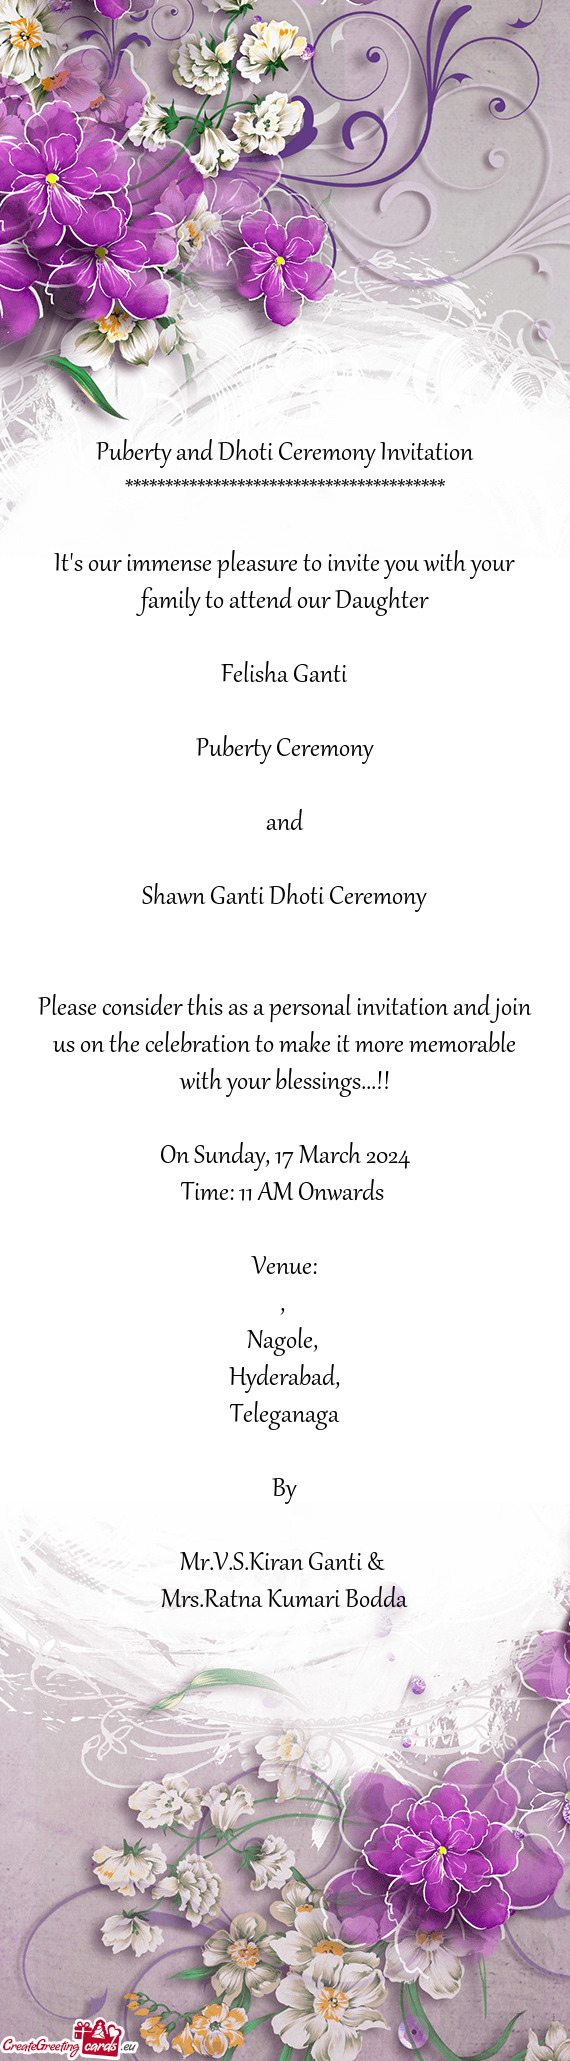 Puberty and Dhoti Ceremony Invitation